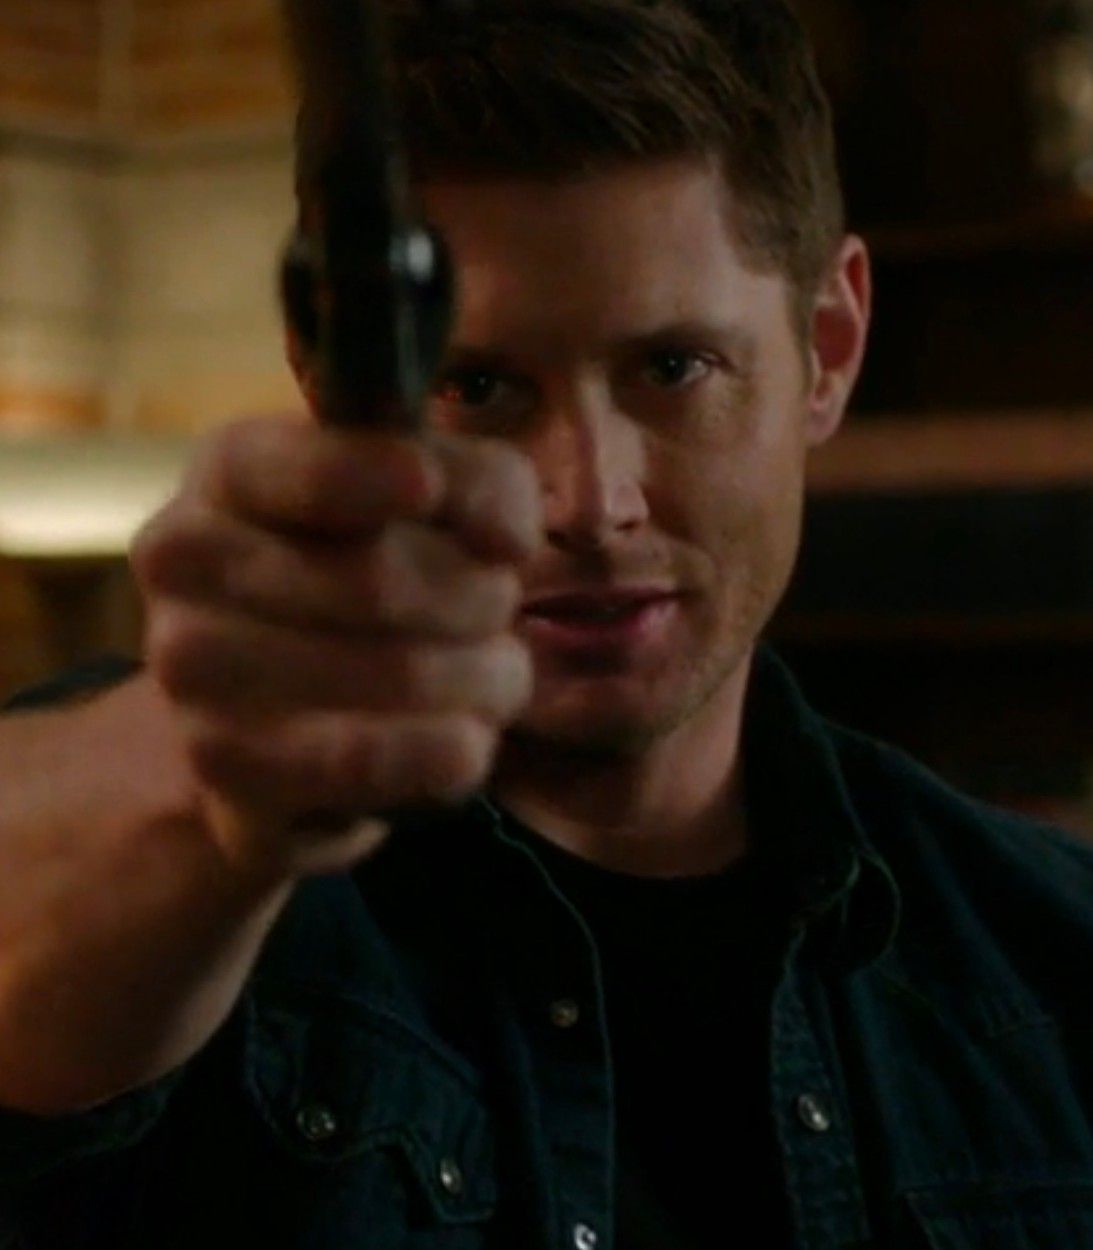 Jensen Ackles as Dean Winchester with Colt in Supernatural vertical